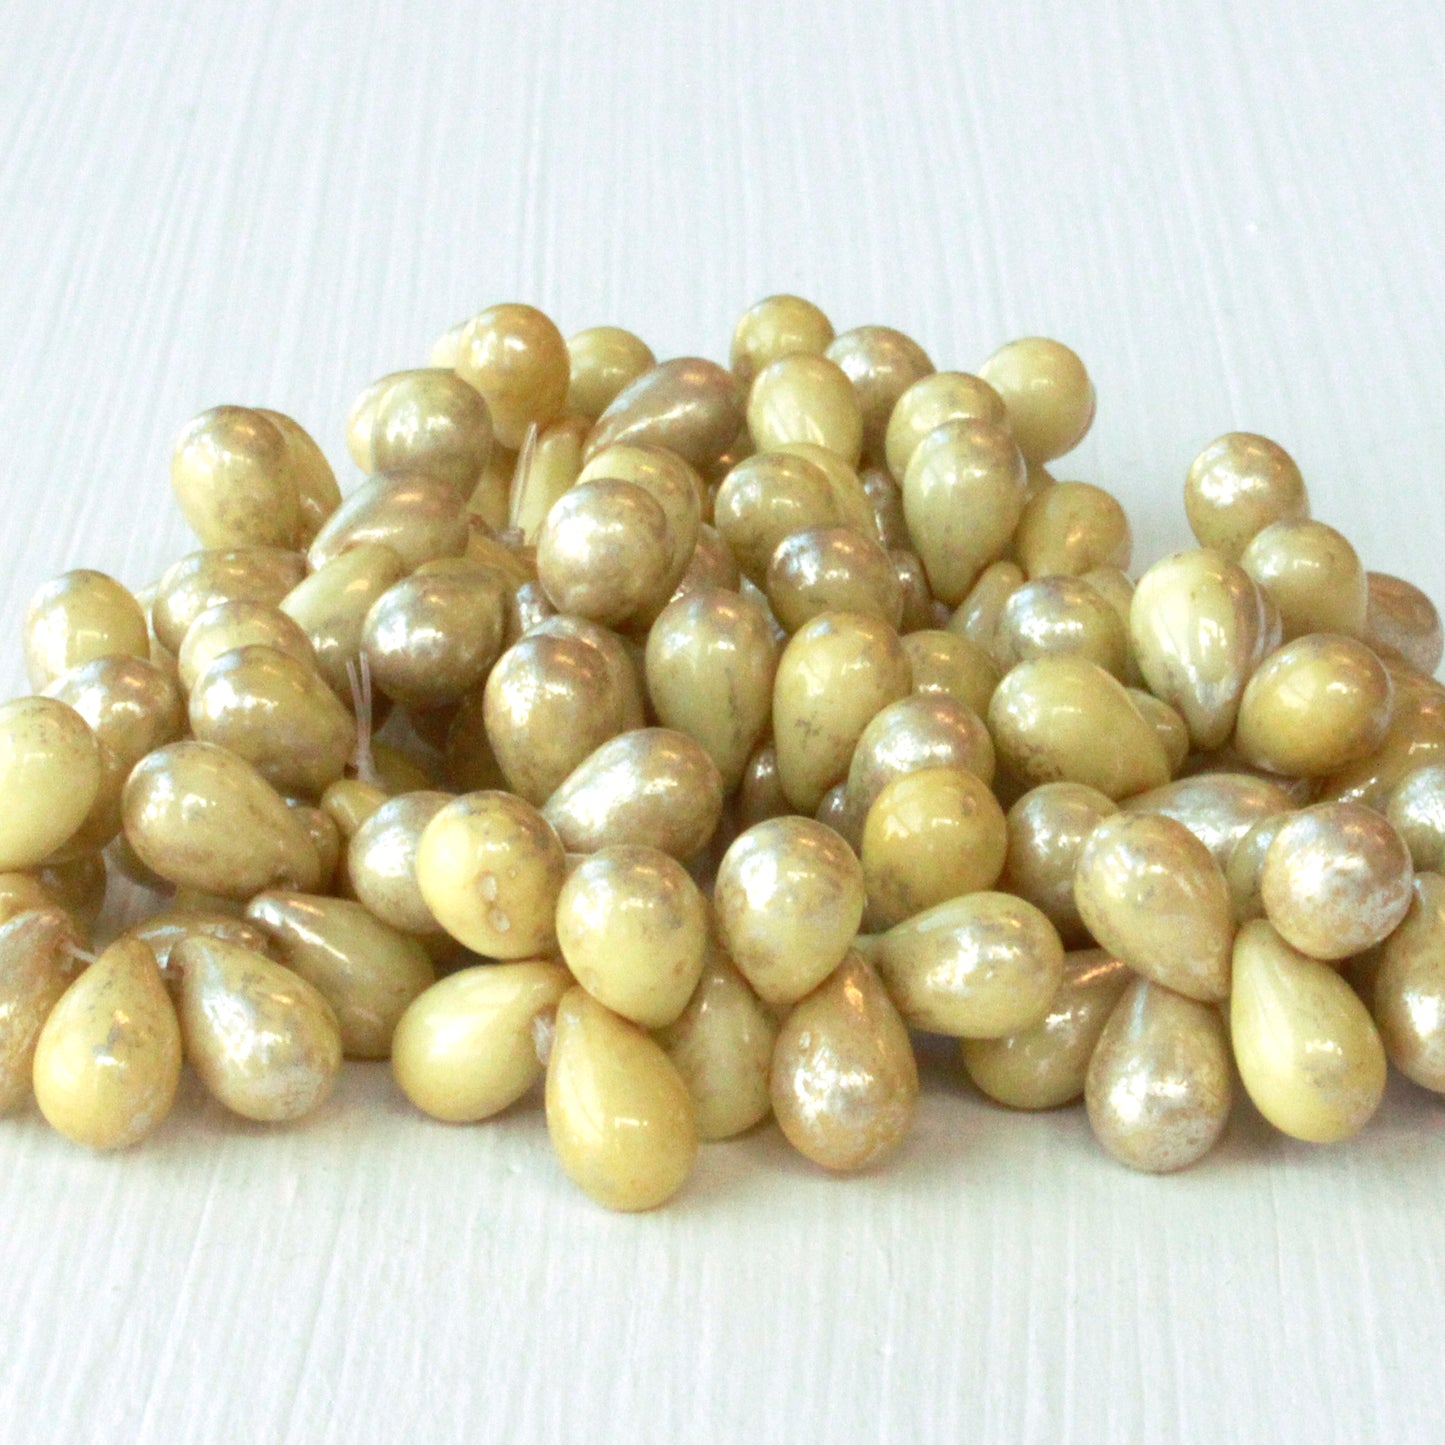 Load image into Gallery viewer, 5x7mm Glass Teardrop Beads - Opaque Ivory with a Mercury Finish - 50 Beads
